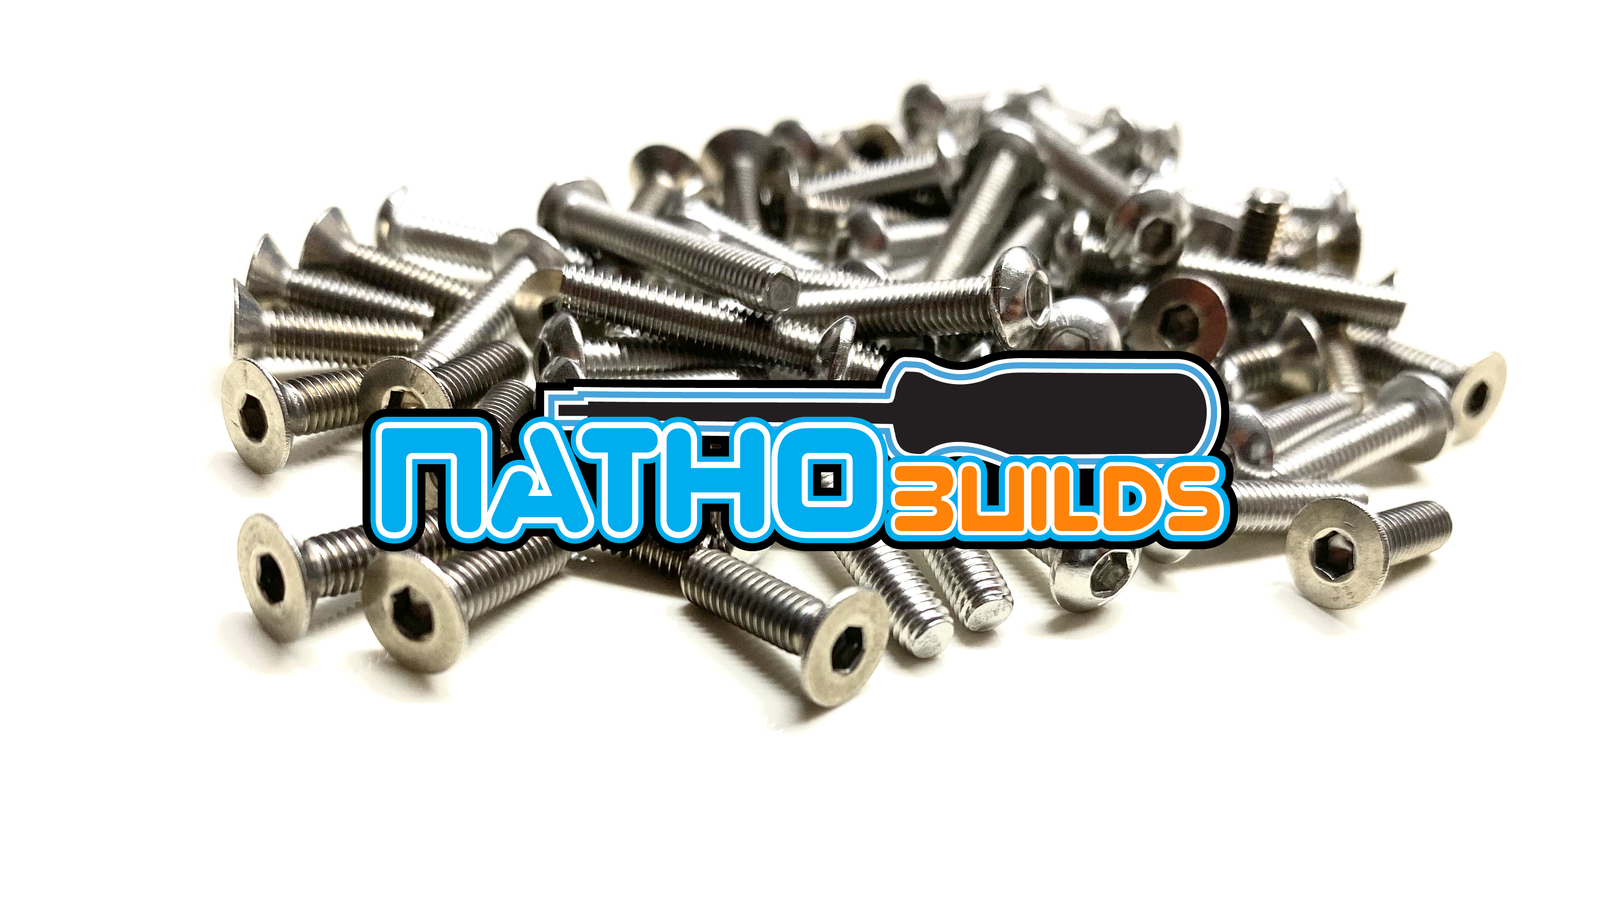 NathoBuilds: Stainless Steel Screw Kits - 4WD - TLR 22X-4